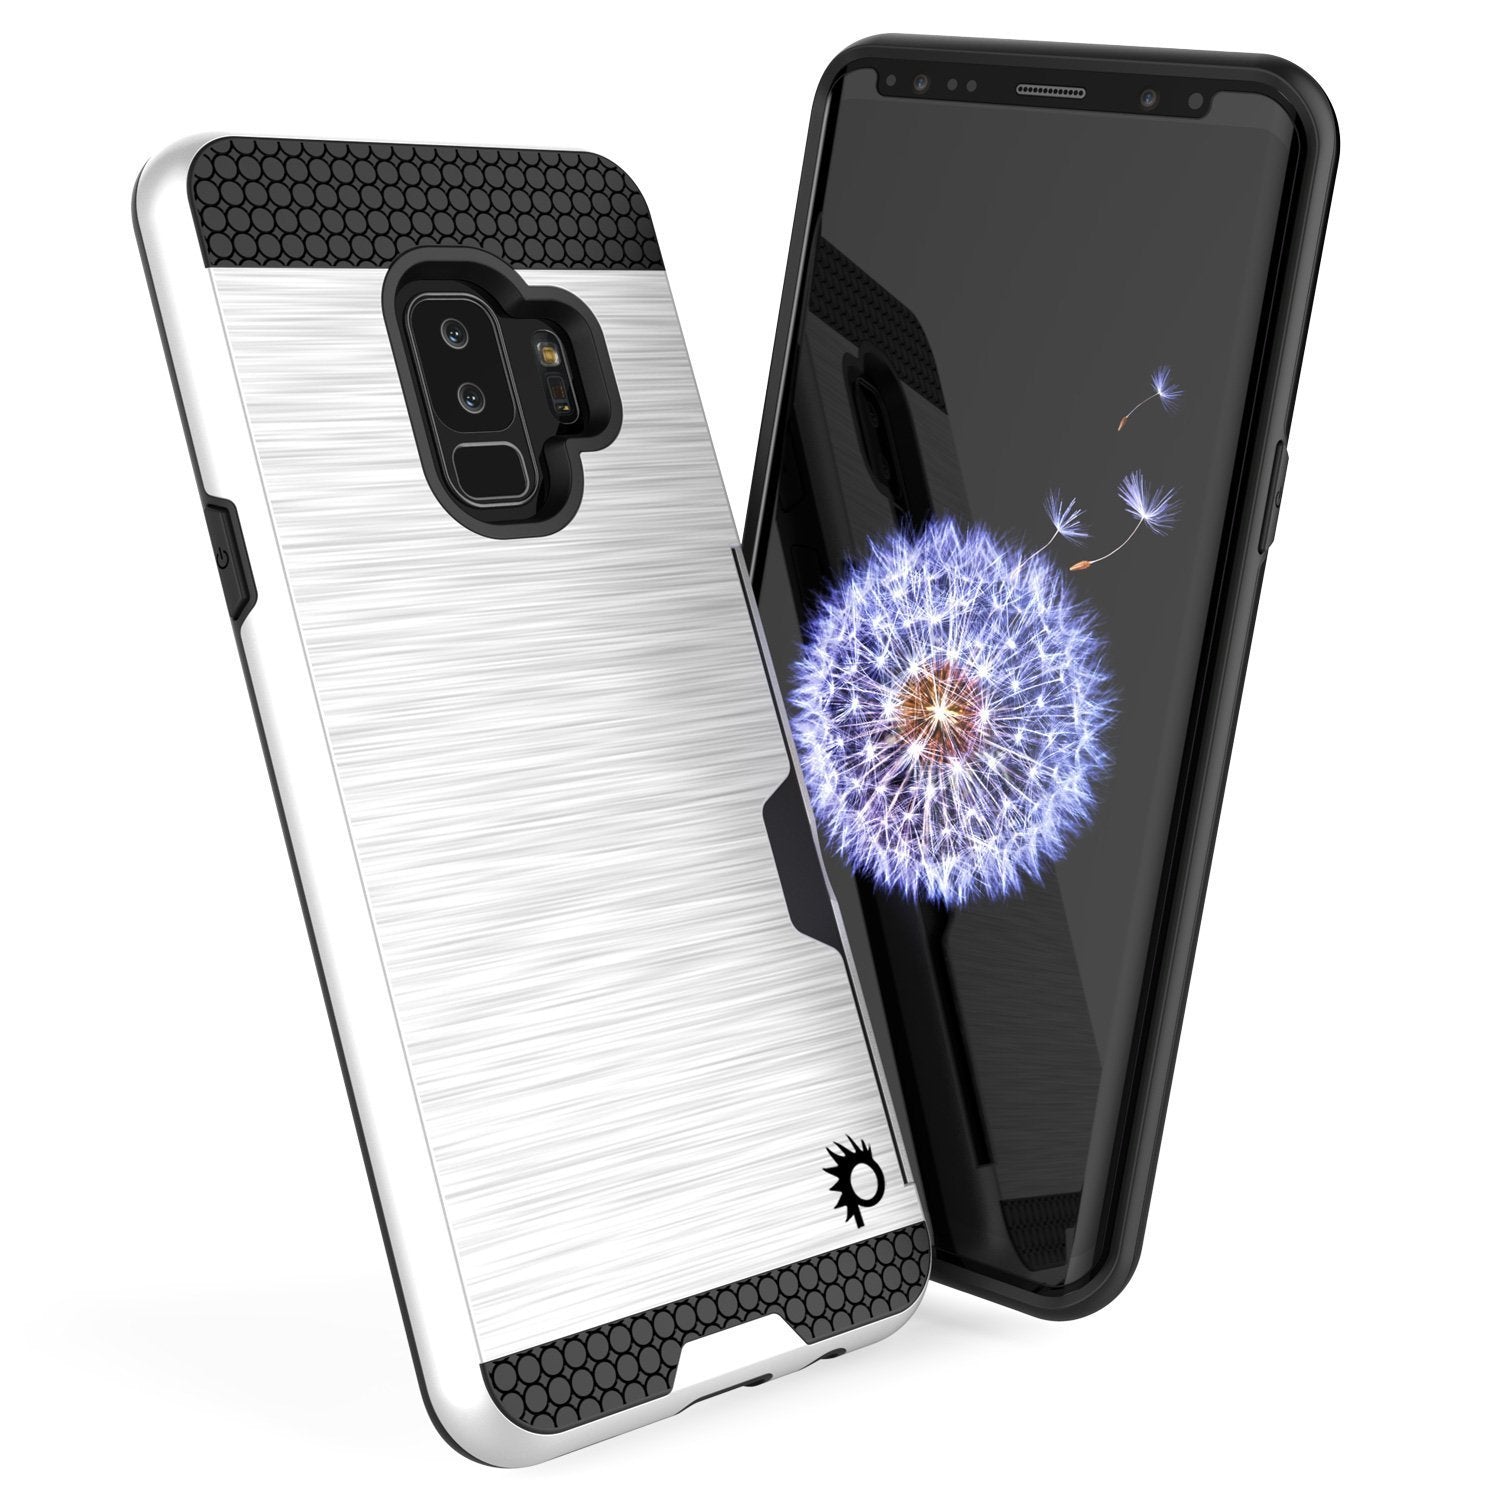 Galaxy S9 Plus Case, PUNKcase [SLOT Series] [Slim Fit] Dual-Layer Armor Cover w/Integrated Anti-Shock System, Credit Card Slot & Screen Protector [White] - PunkCase NZ